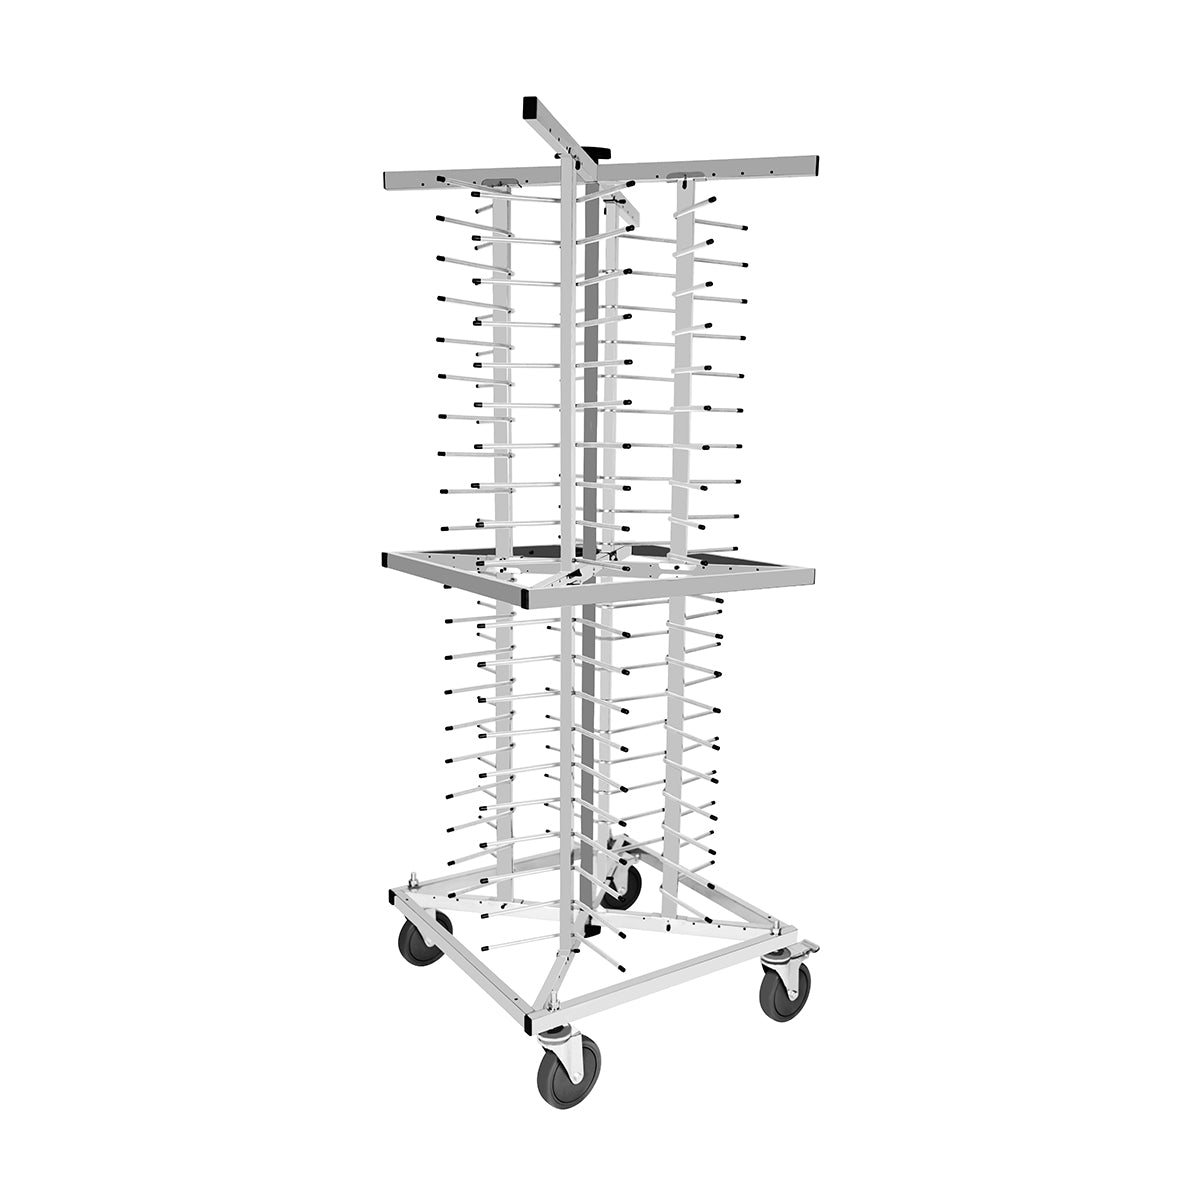 GN-603 Plate Stacking Trolley to Suit 72 Plates 600x610x1610mm Tomkin Australia Hospitality Supplies